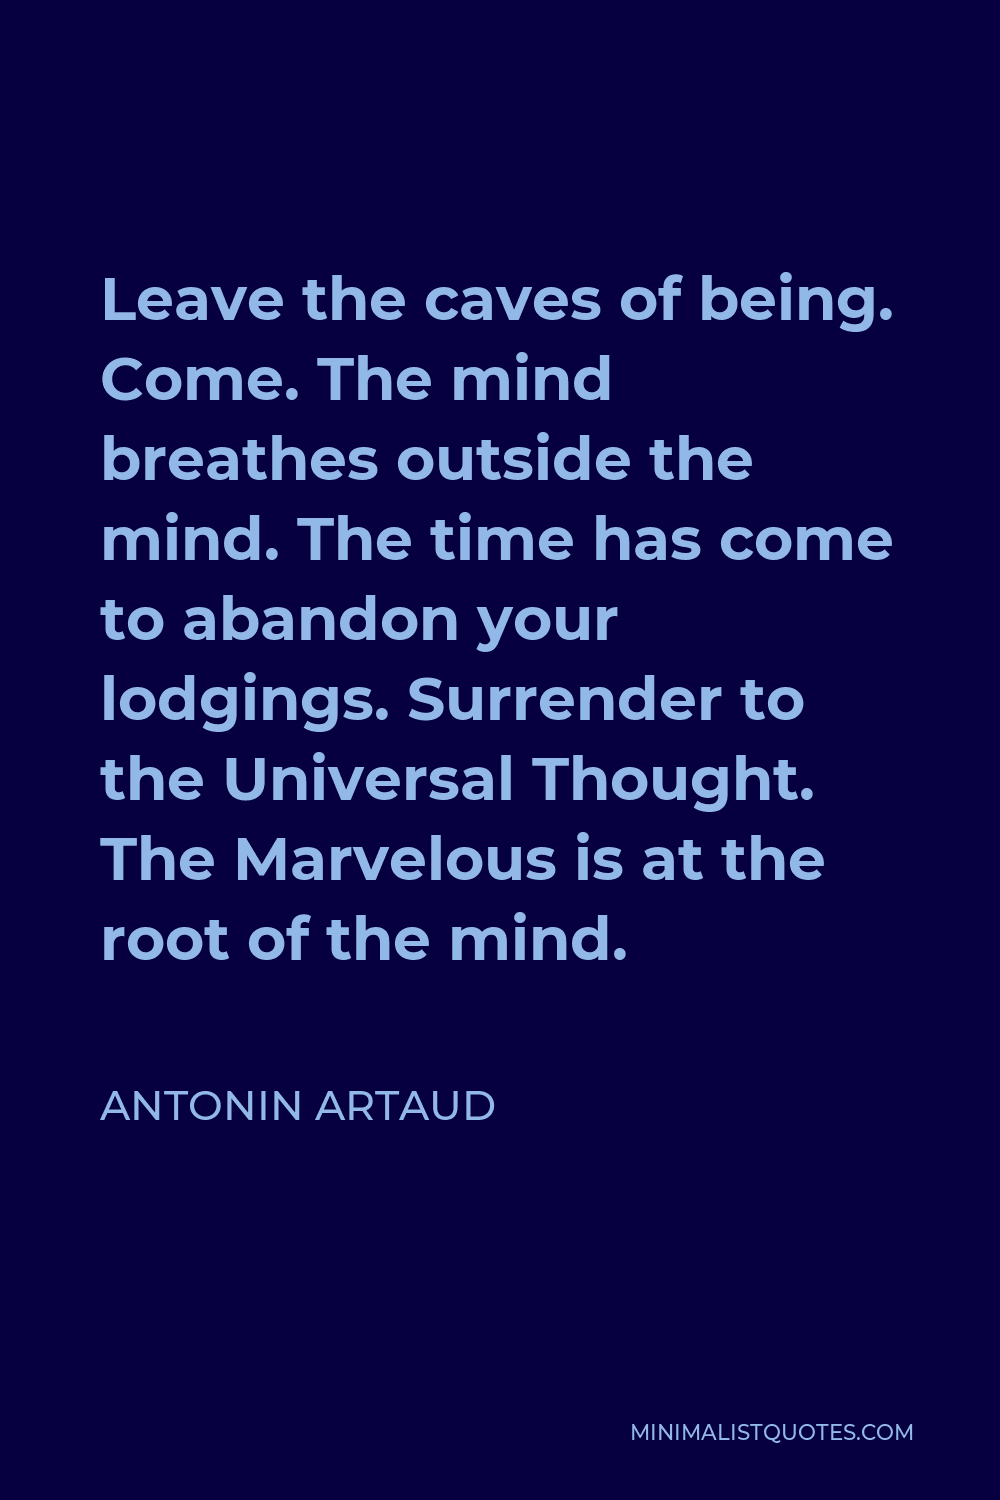 Antonin Artaud Quote - Leave the caves of being. Come. The mind breathes outside the mind. The time has come to abandon your lodgings. Surrender to the Universal Thought. The Marvelous is at the root of the mind.